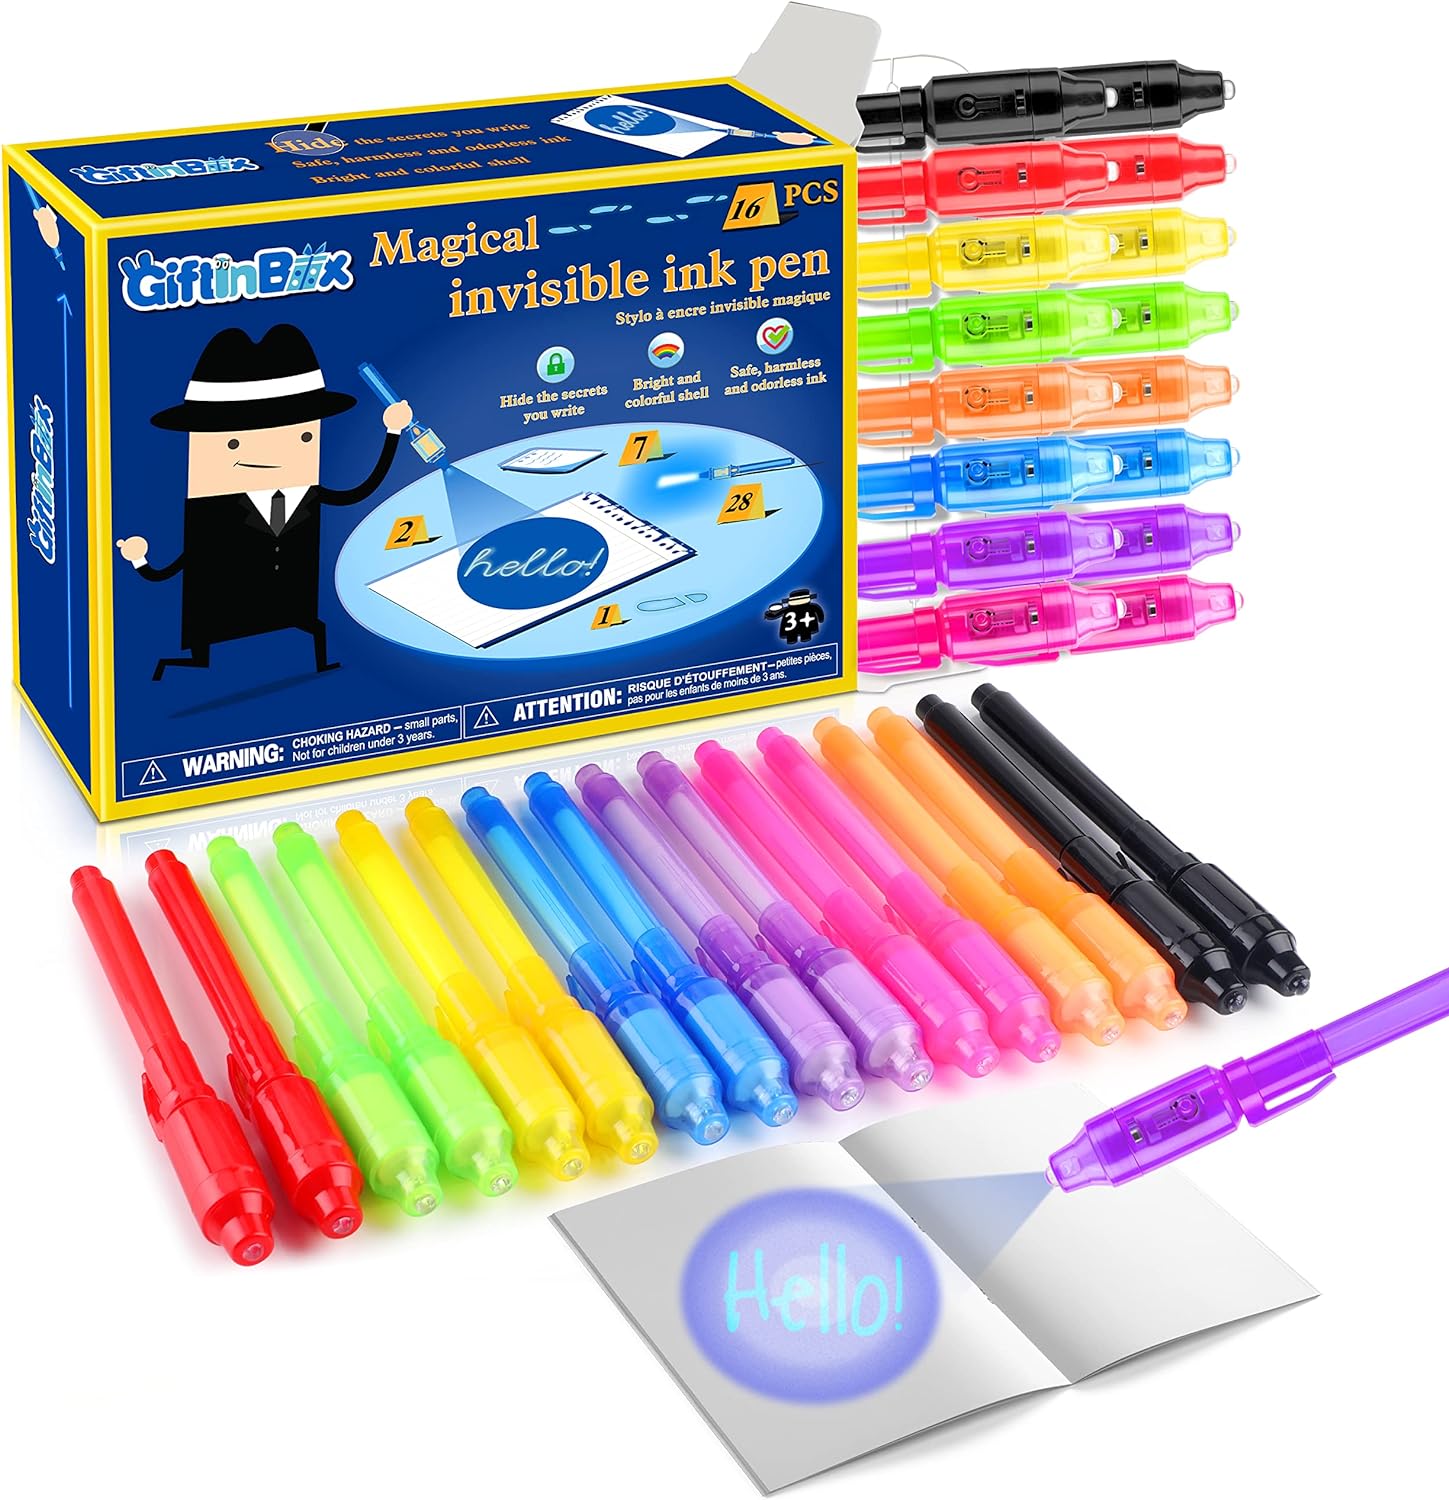 GIFTINBOX Invisible Ink Pen, 16PCS Invisible Ink Pens 